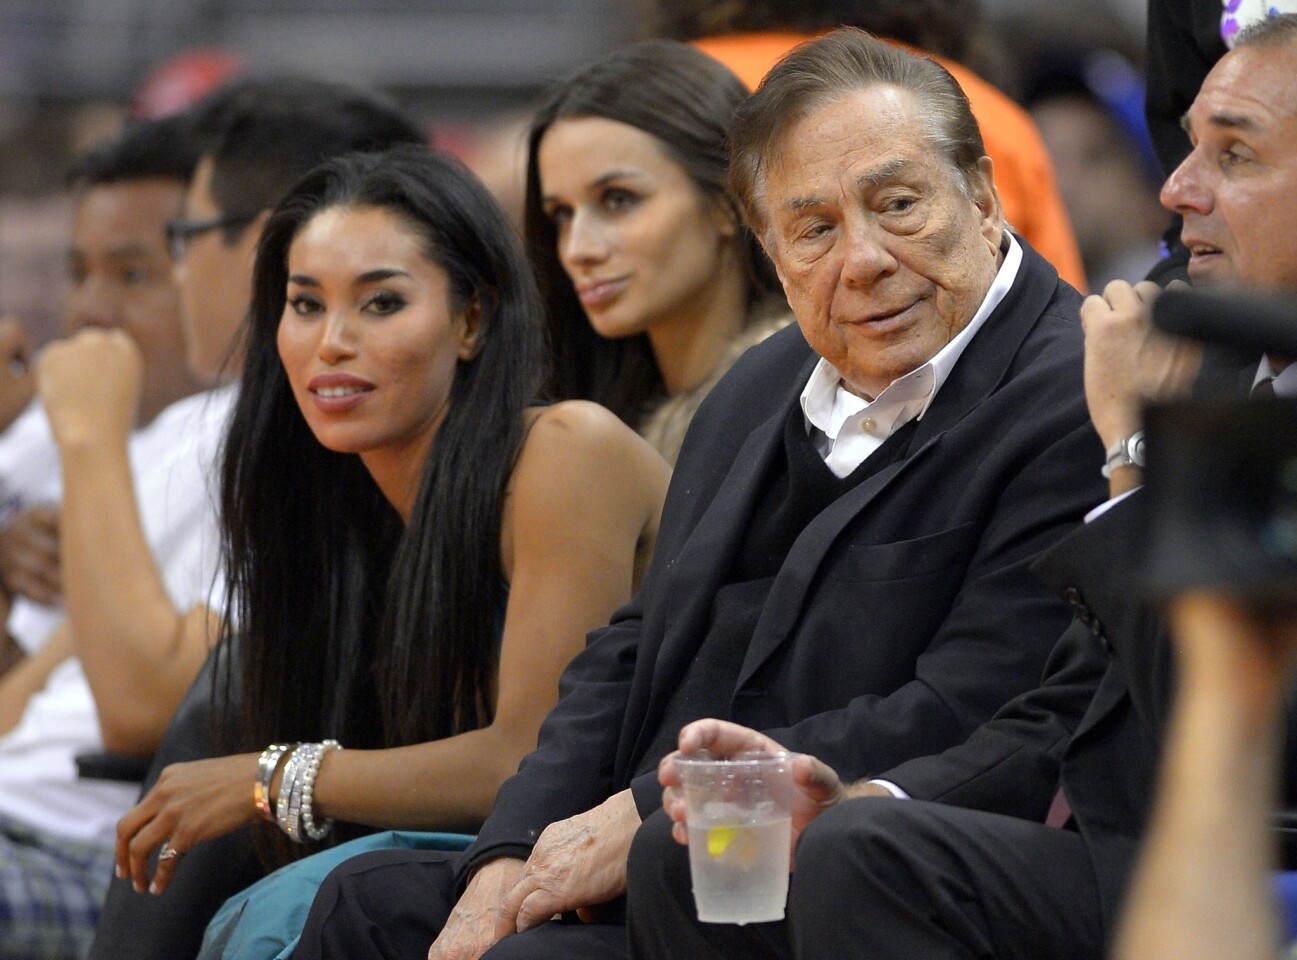 Los Angeles Clippers owner Donald Sterling, right, and V. Stiviano, left, watch the Clippers play the Sacramento Kings during an exhibition game earlier this season at Staples Center.